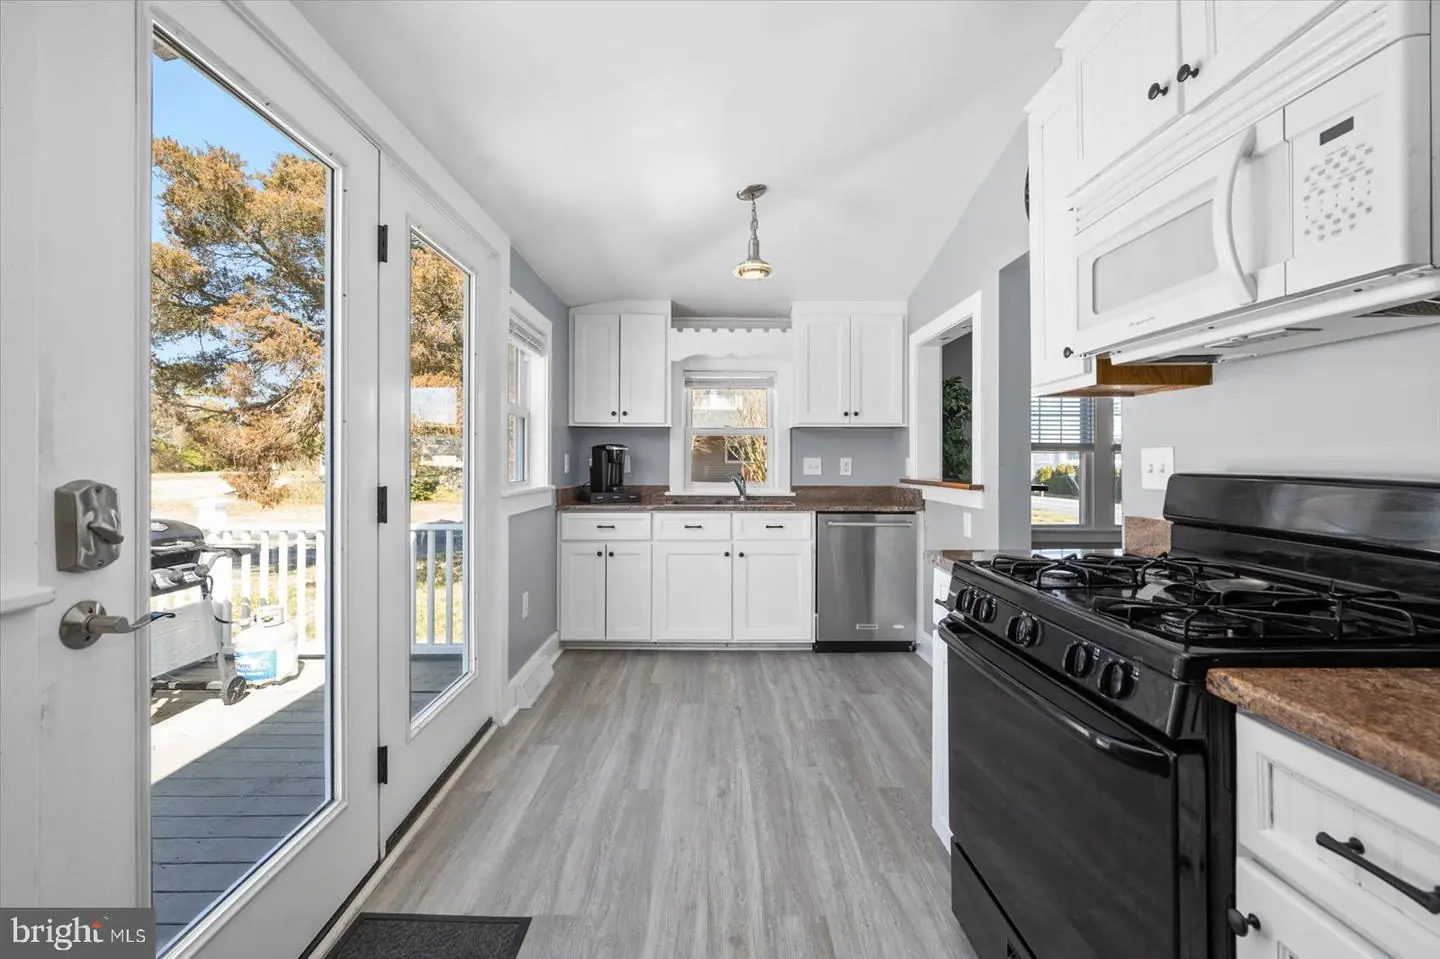 MDWO2019446-802902743174-2024-03-07-00-08-06 9801 / 9805 Golf Course Rd | Ocean City, MD Real Estate For Sale | MLS# Mdwo2019446  - 1st Choice Properties